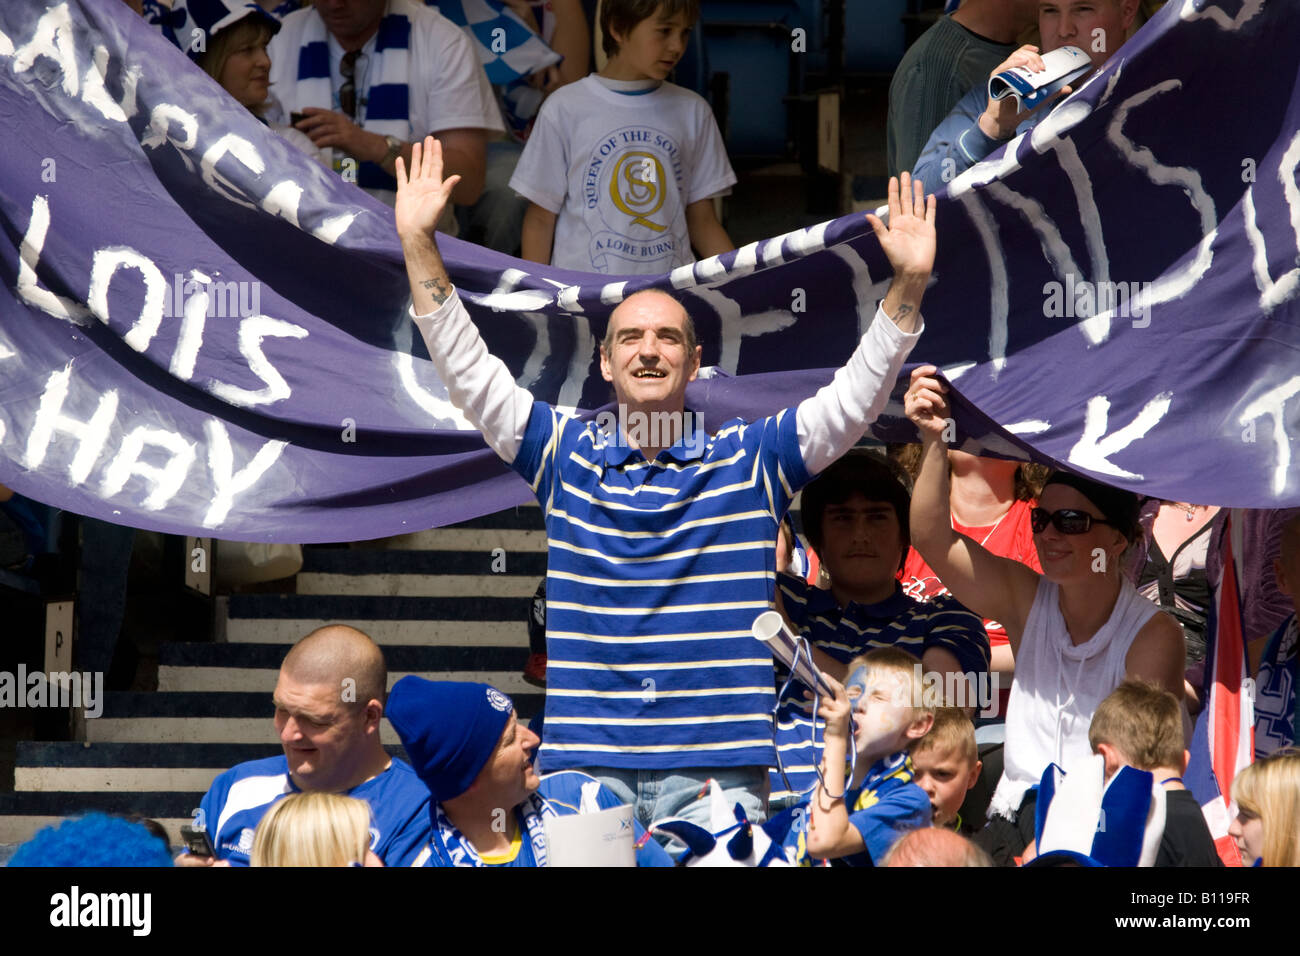 Football fan amoungest the crowd standing cheering his team on at Scottish Cup Final Hampden Park Scotland UK Stock Photo